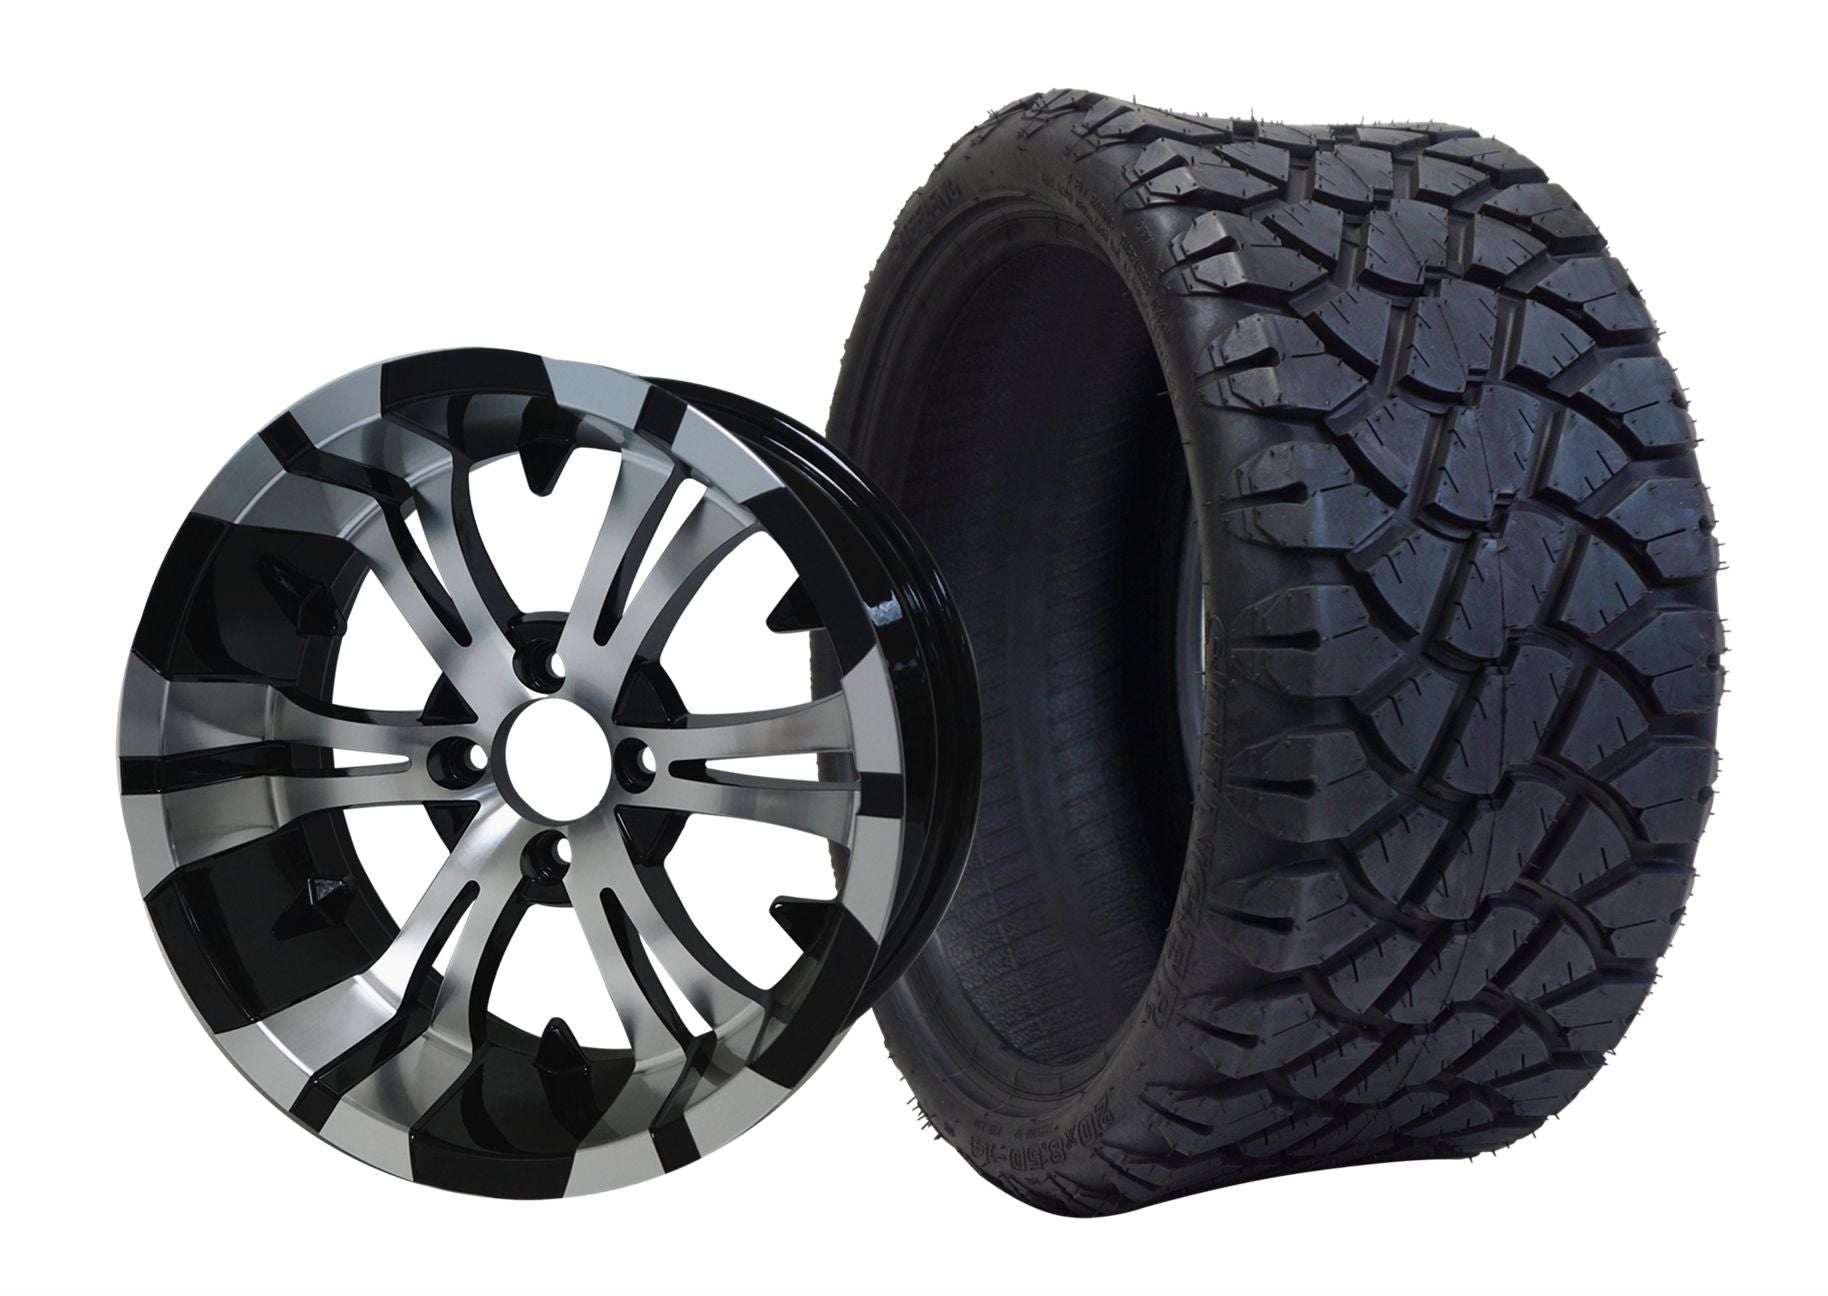 SGC 14" x 7" Vampire Machined/Black Wheel - Aluminum AlloySTEELENG 20"x8.5"-14" STINGER AT Tire DOT approved WH1413-TR1402